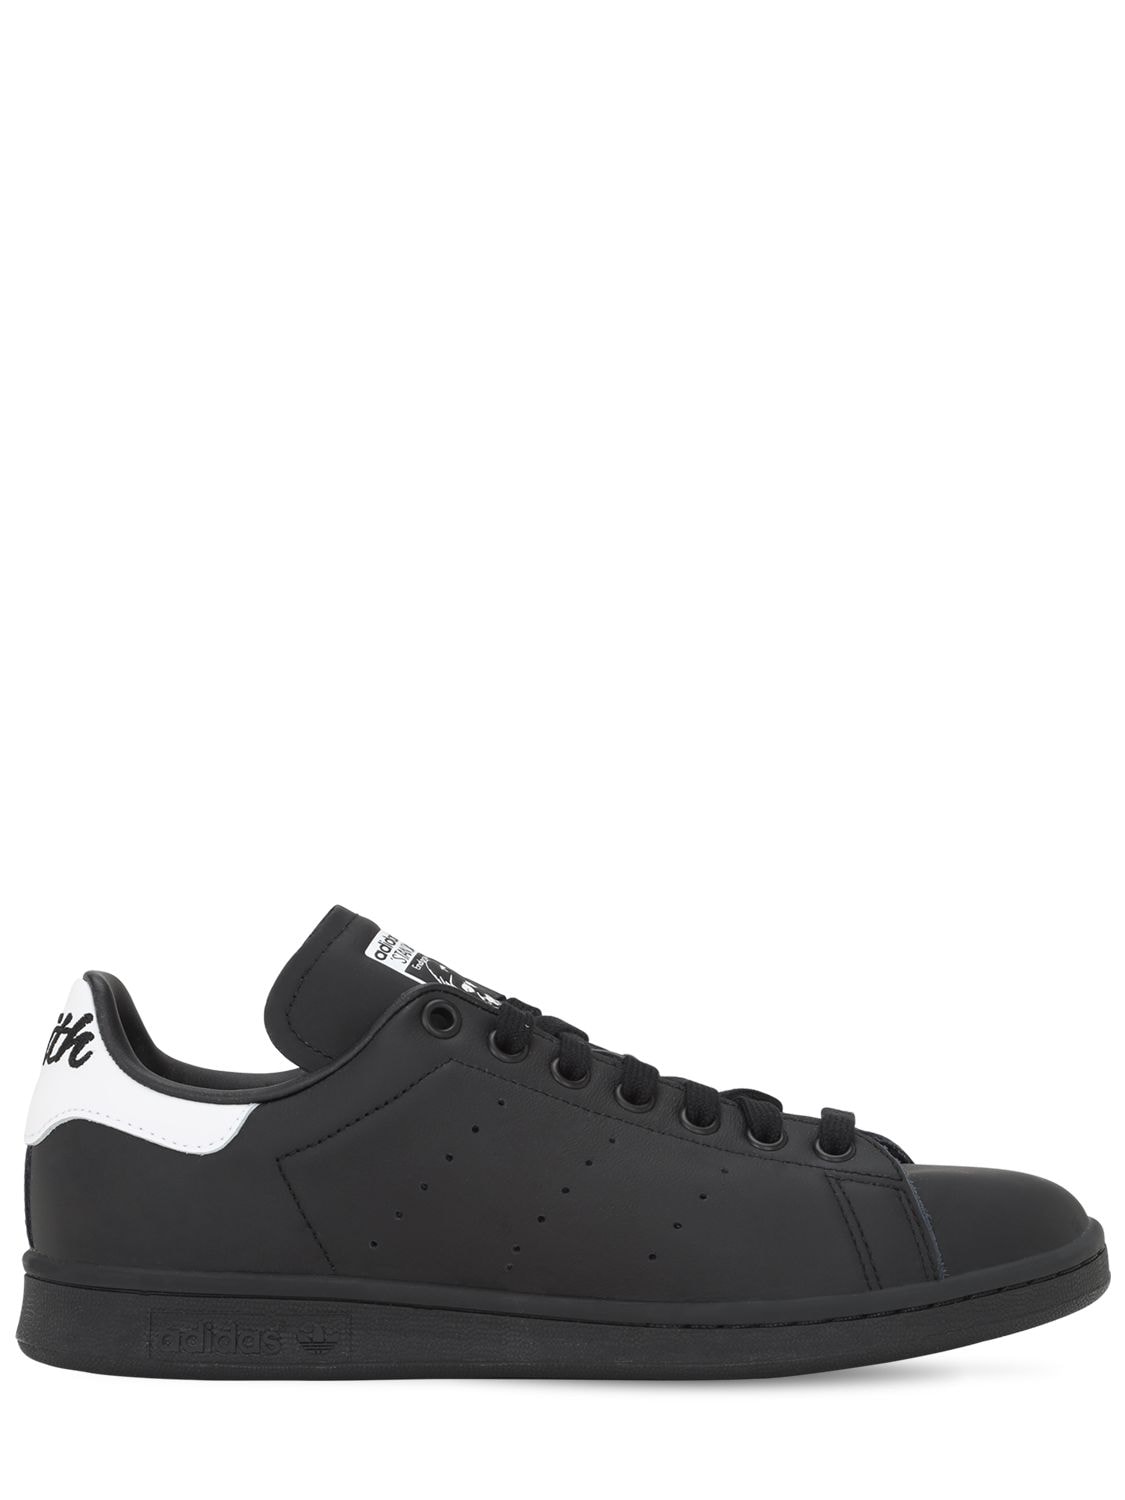 Adidas Originals Stan Smith Leather Trainers In Black